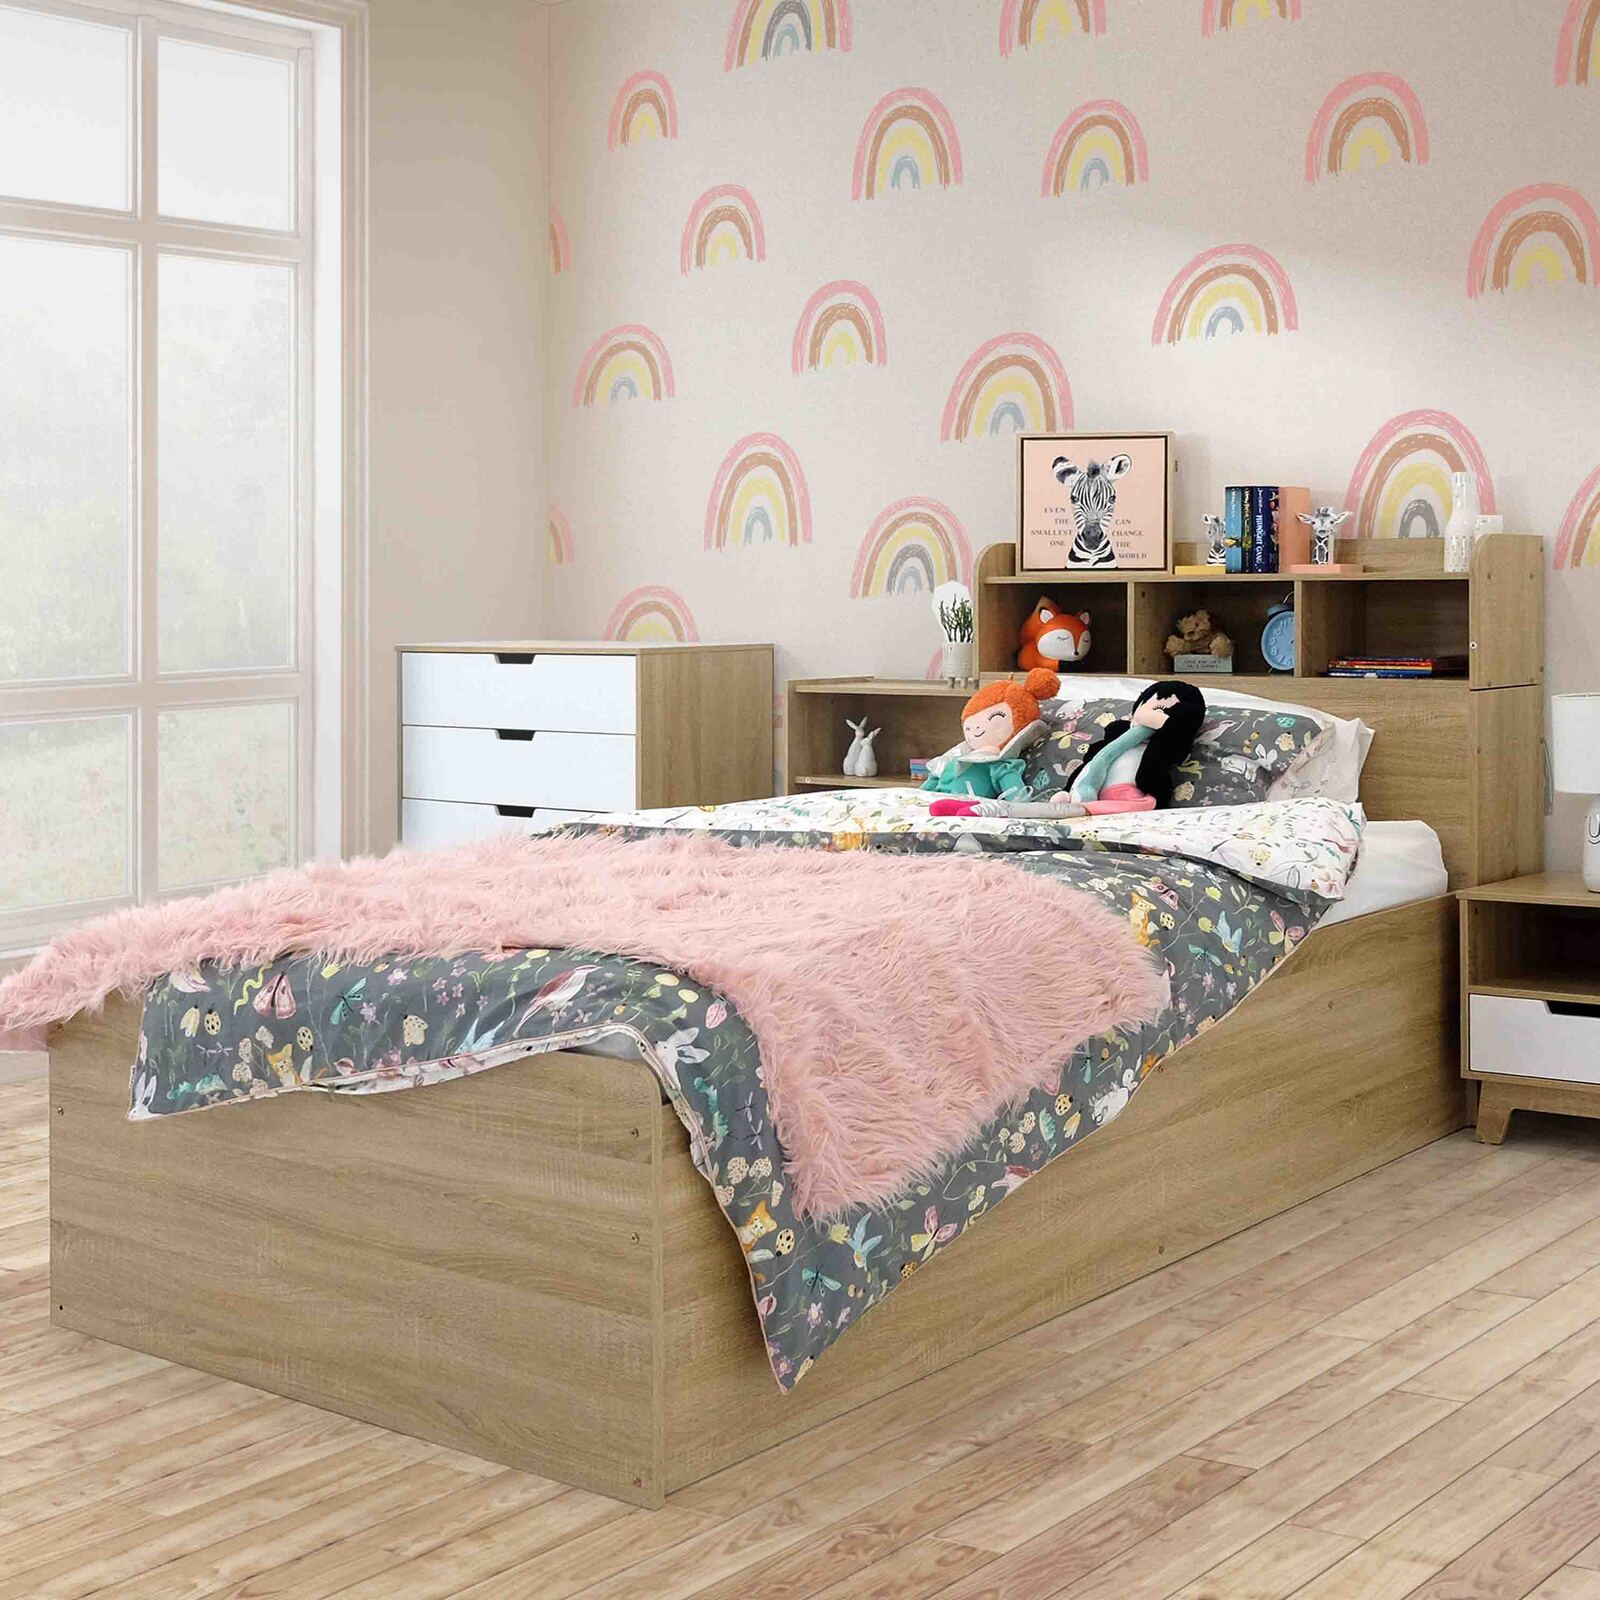 Finley Wooden Bed with Storage- Single or King Single |Wesco Hub